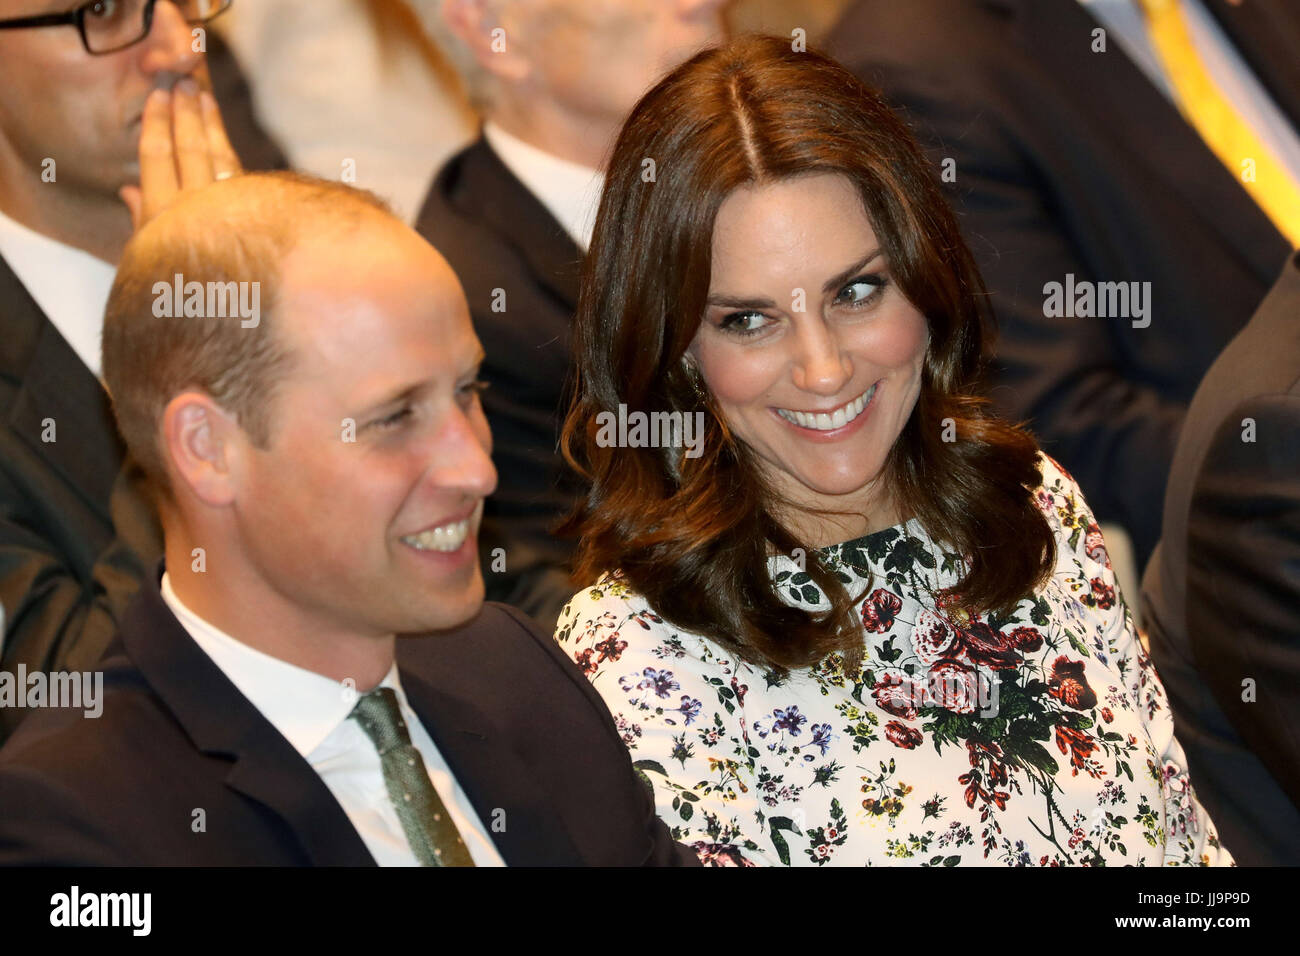 The Duke and Duchess of Cambridge attend a reception inside the Gdansk Shakespeare Theatre on the second day of their three-day tour of Poland. Stock Photo